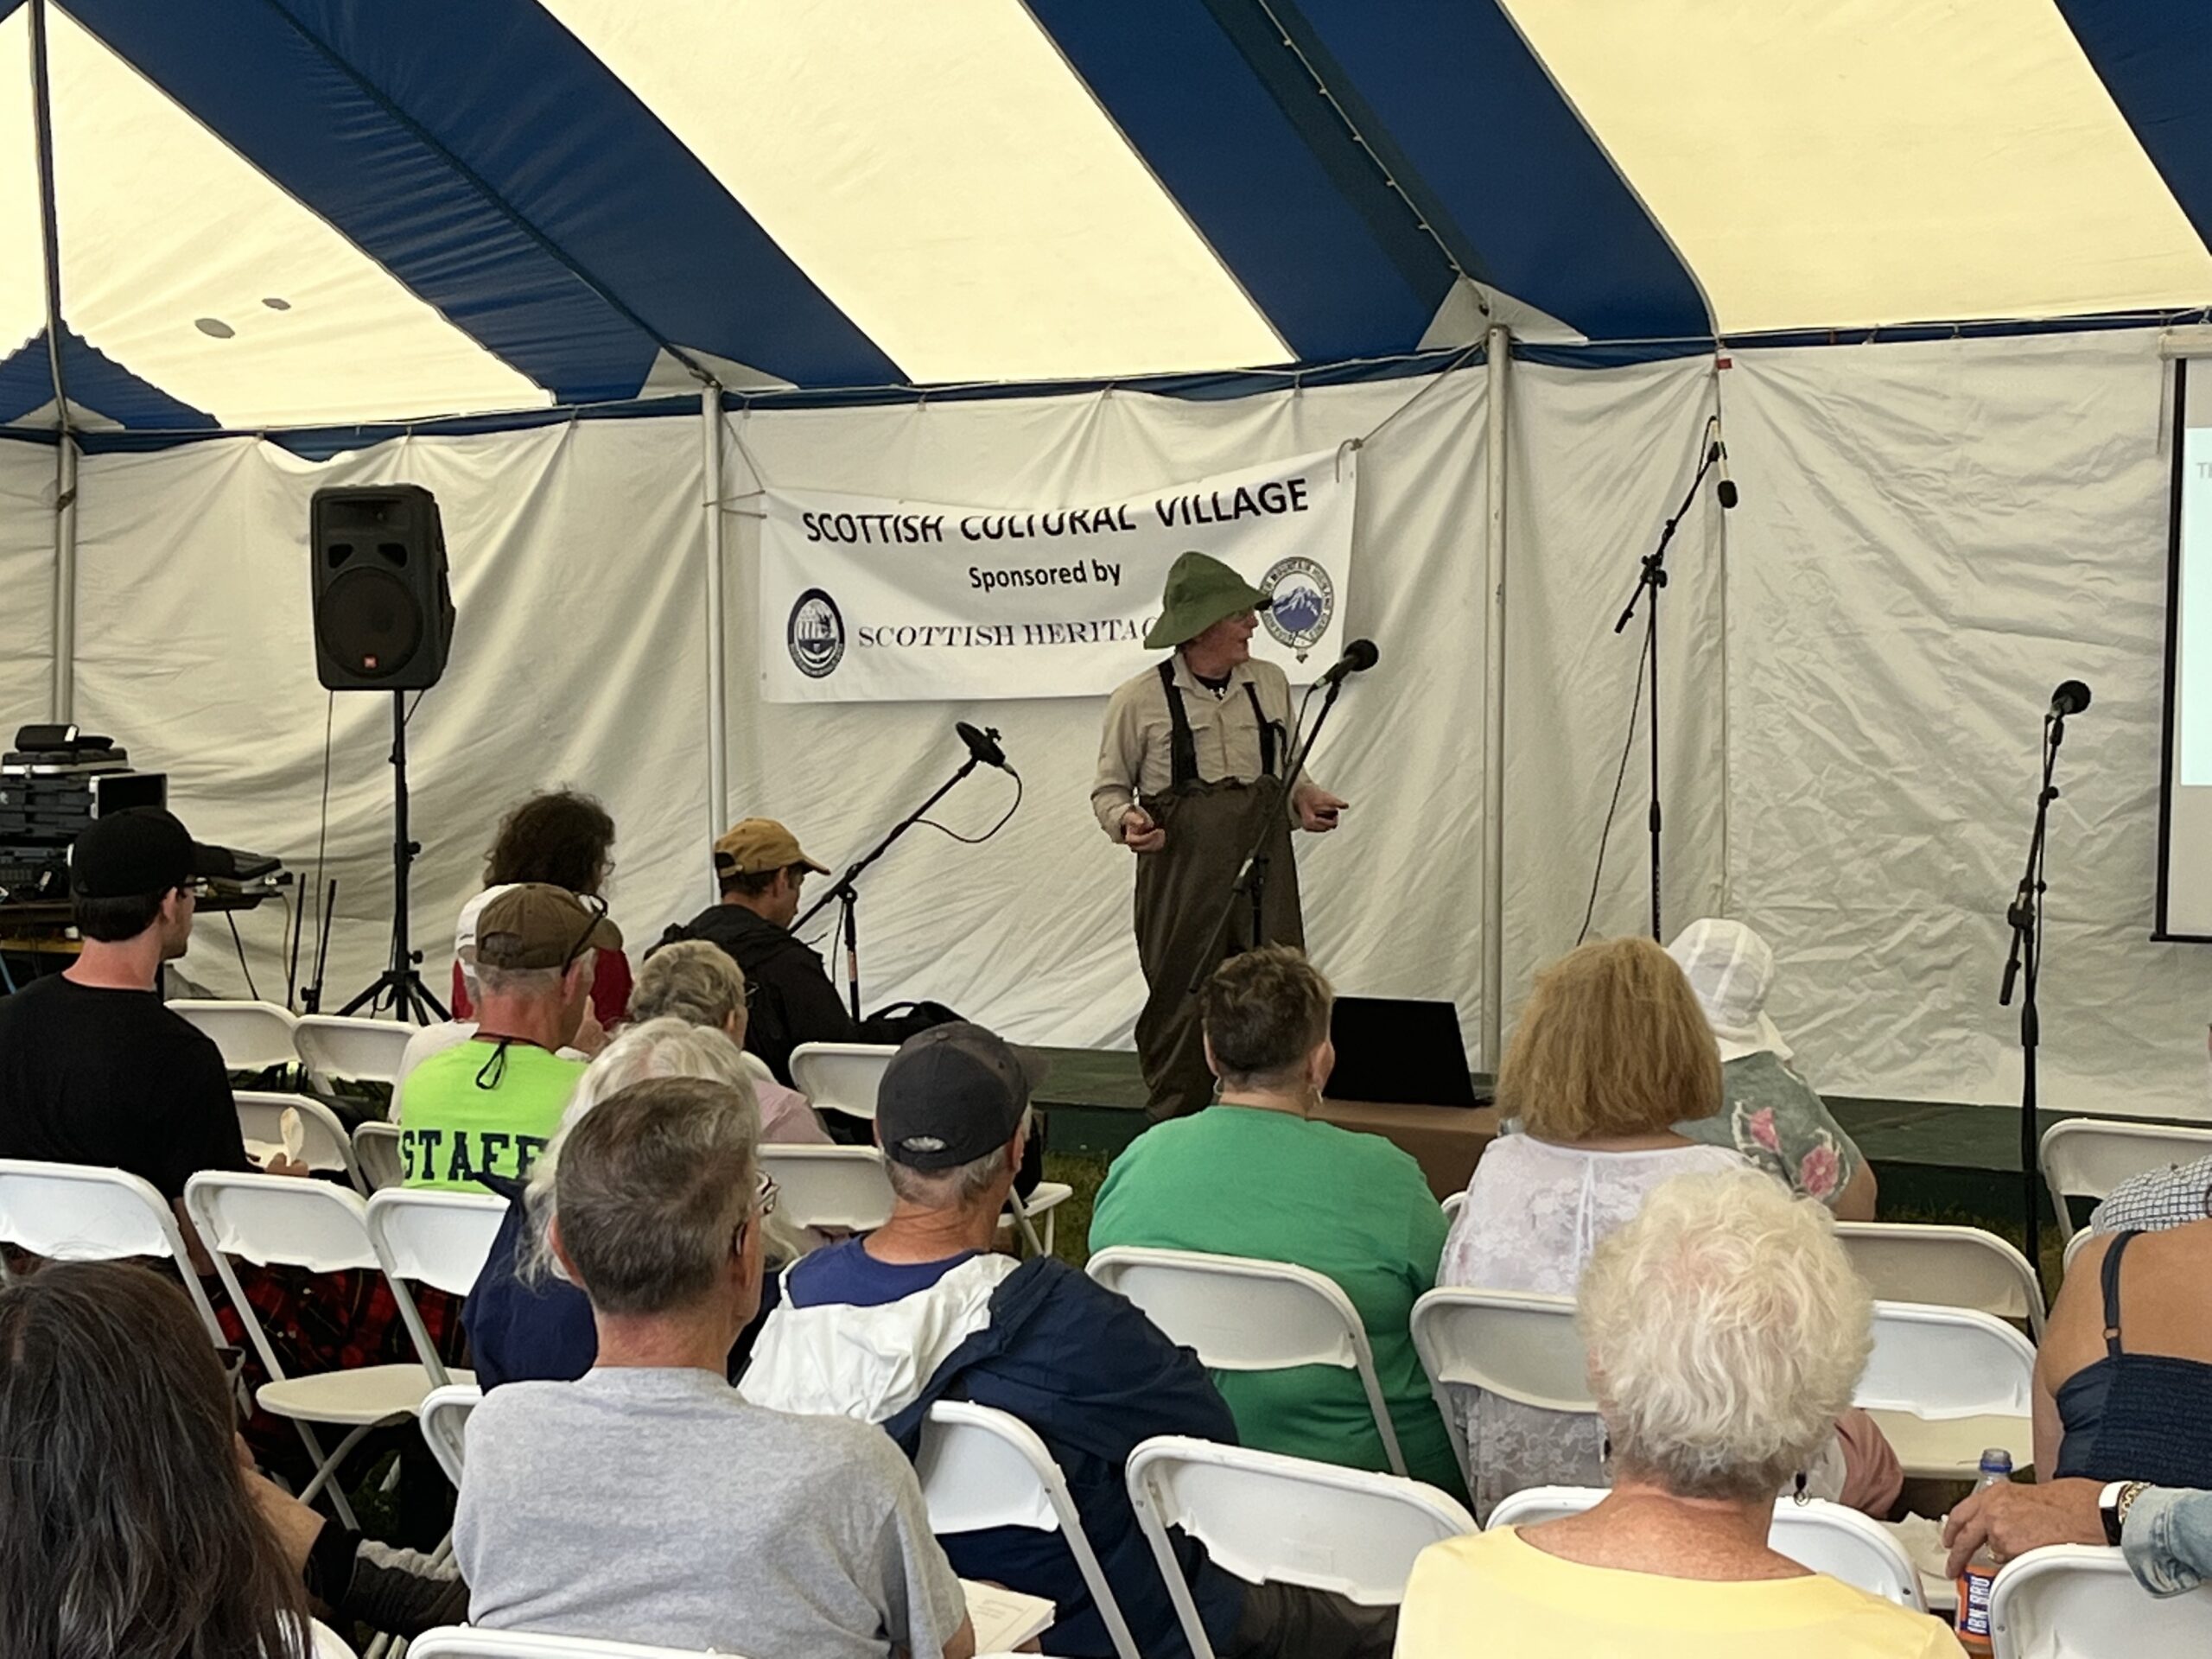 Peter lecturing in the Scottish cultural village tent